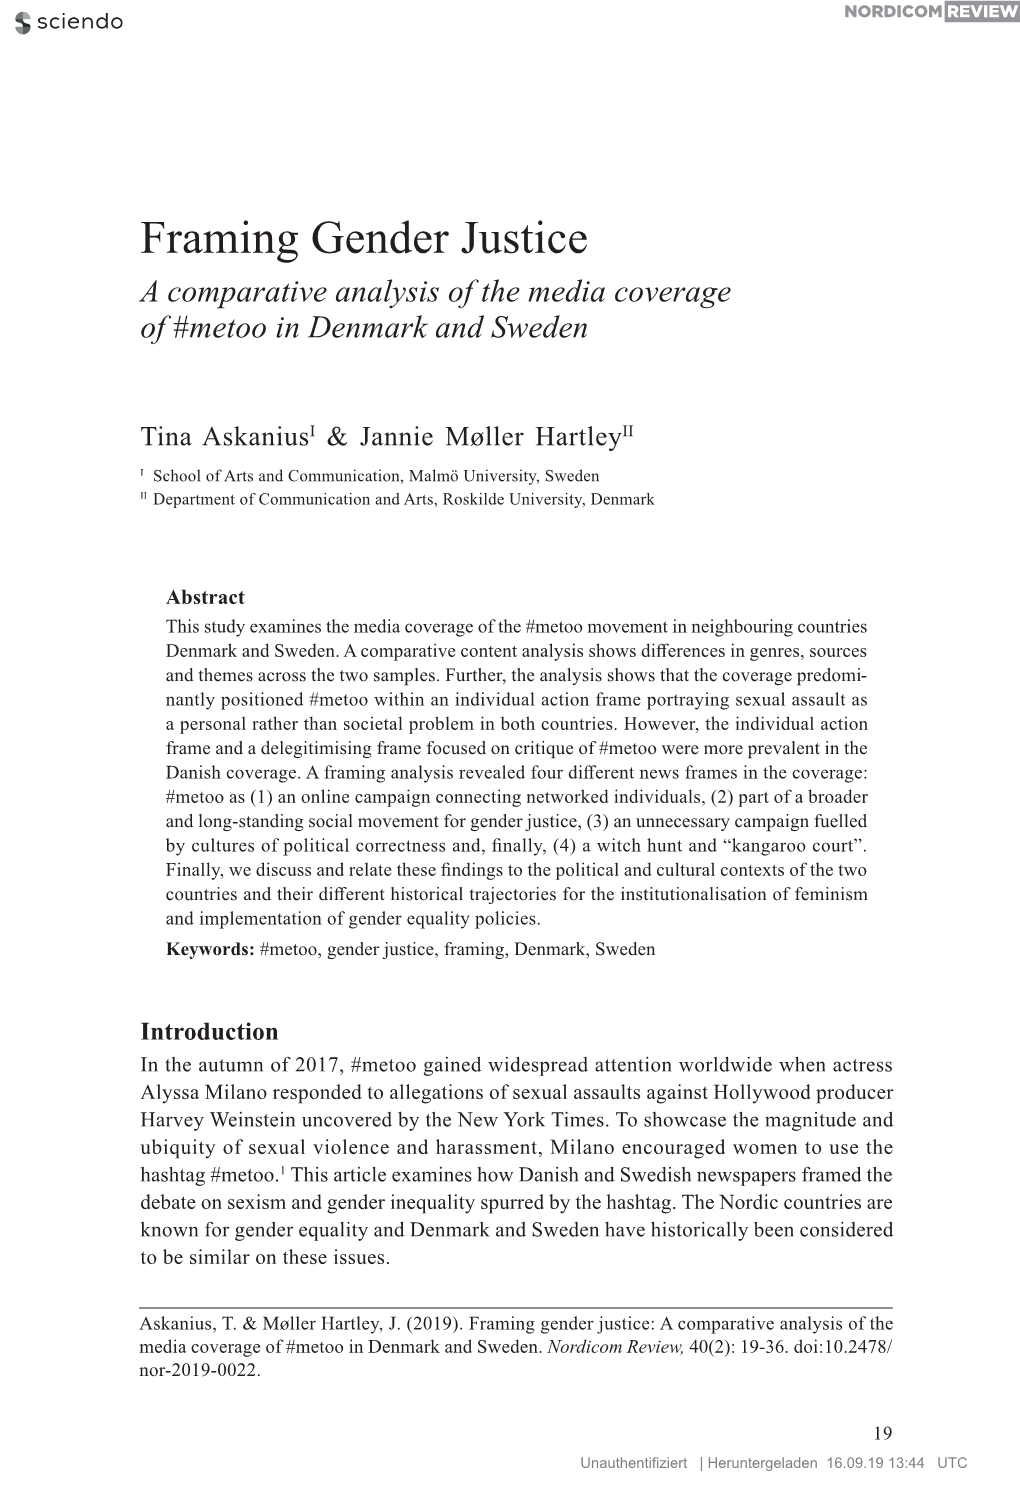 Framing Gender Justice a Comparative Analysis of the Media Coverage of #Metoo in Denmark and Sweden